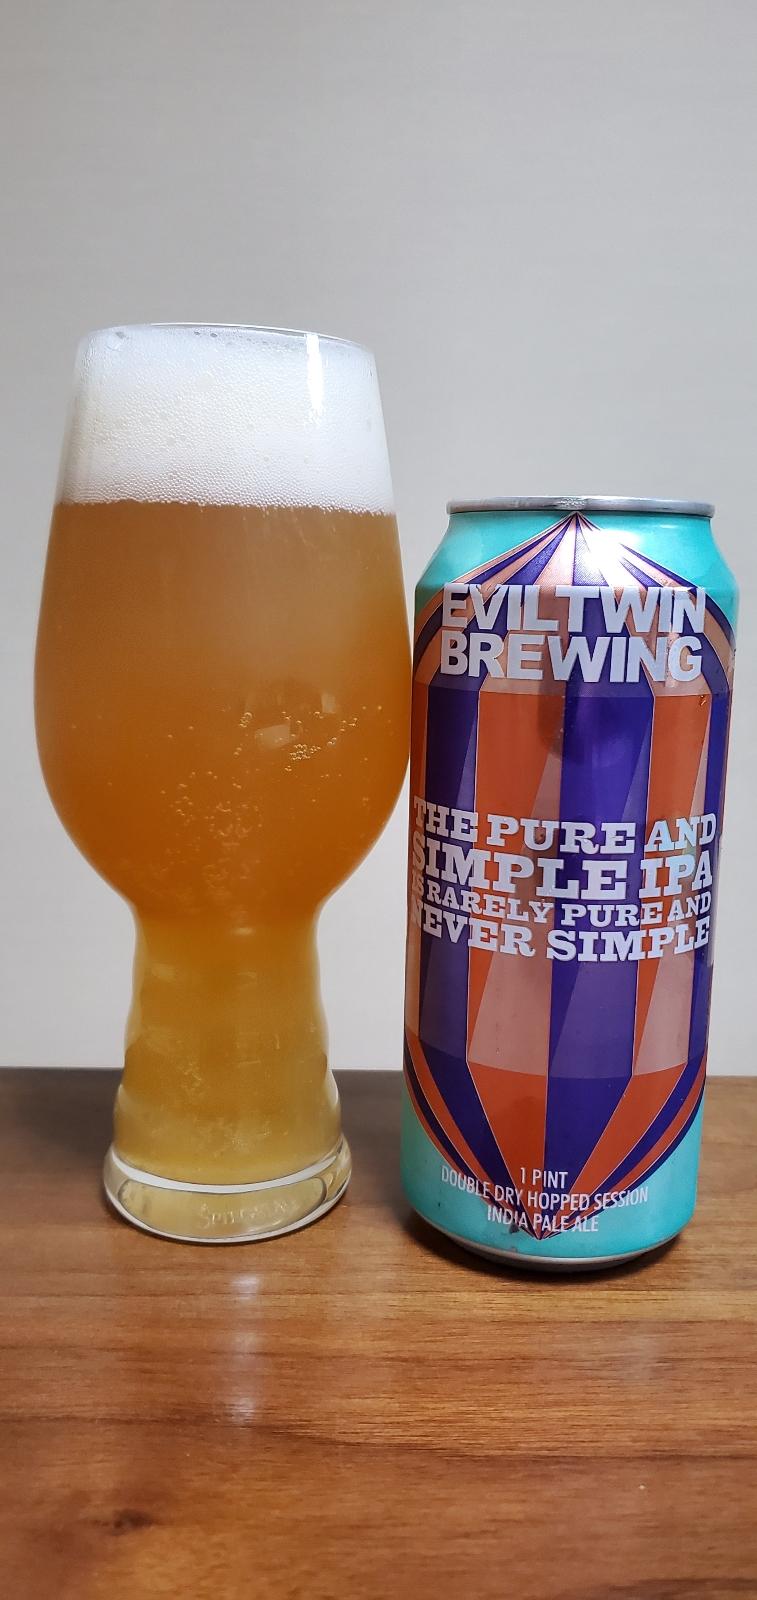 The Pure And Simple IPA is Rarely Pure And Never Simple